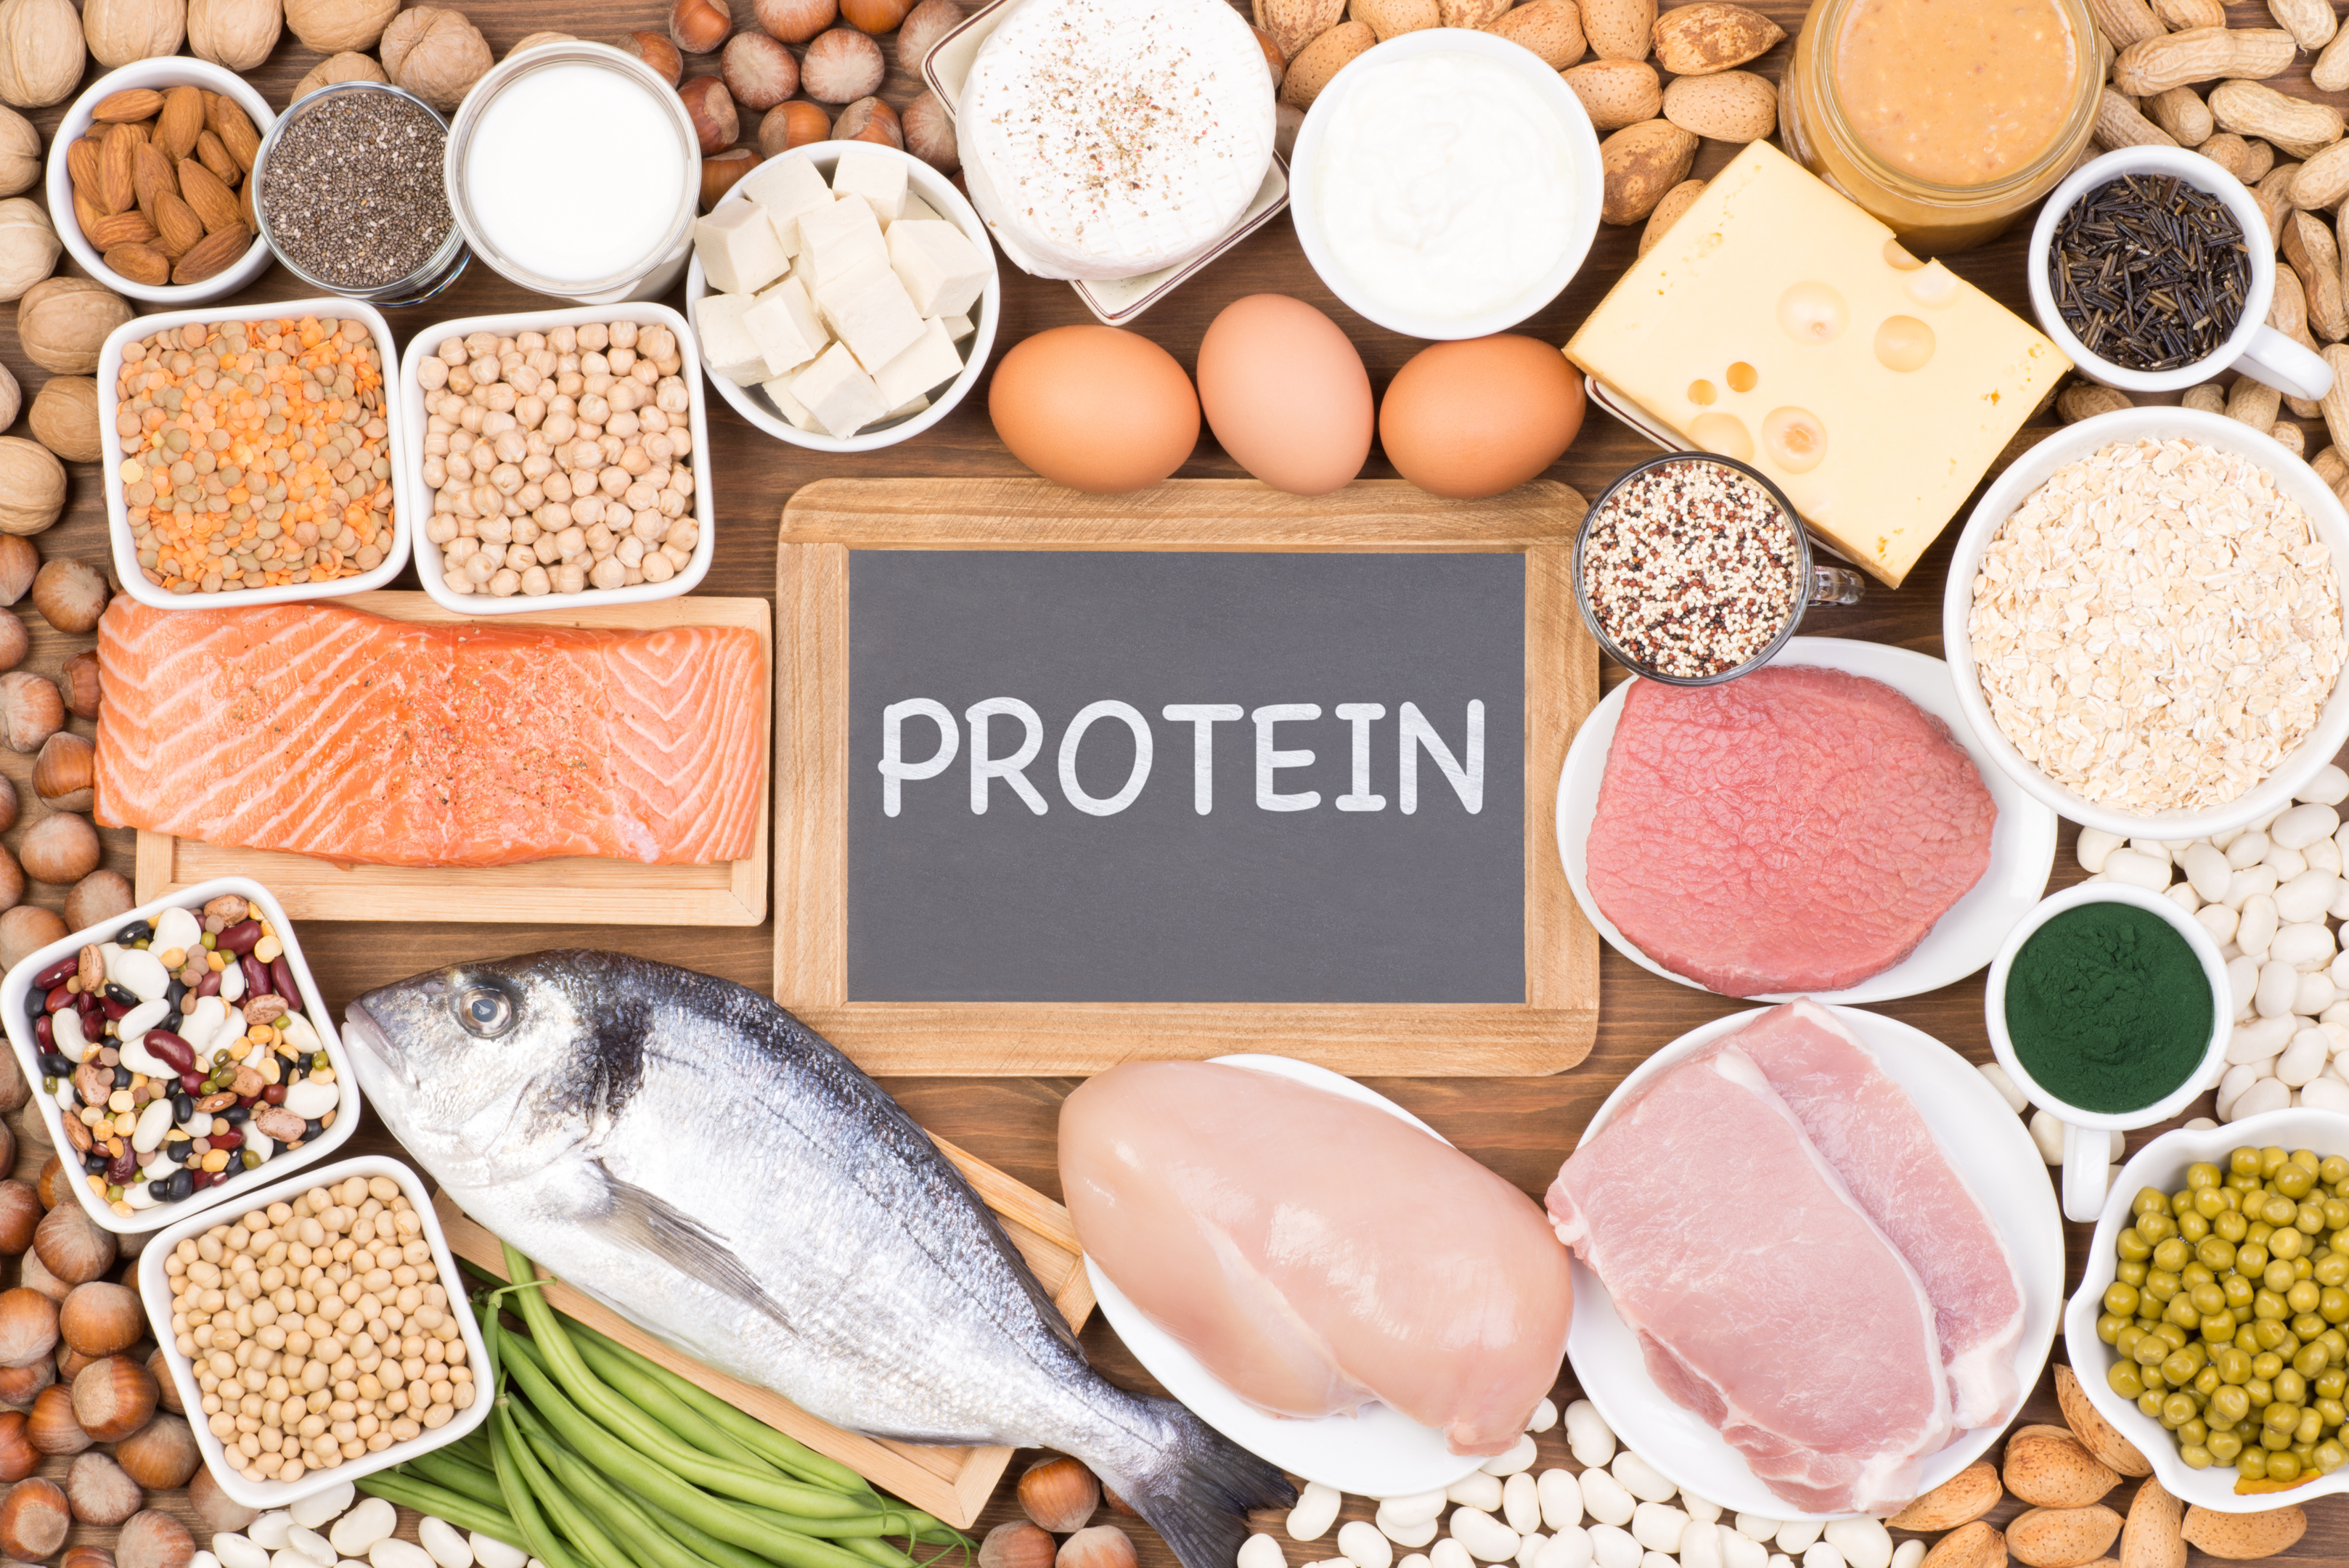 Fastest way for athletes to gain weight is to add more grams of protein to their diet